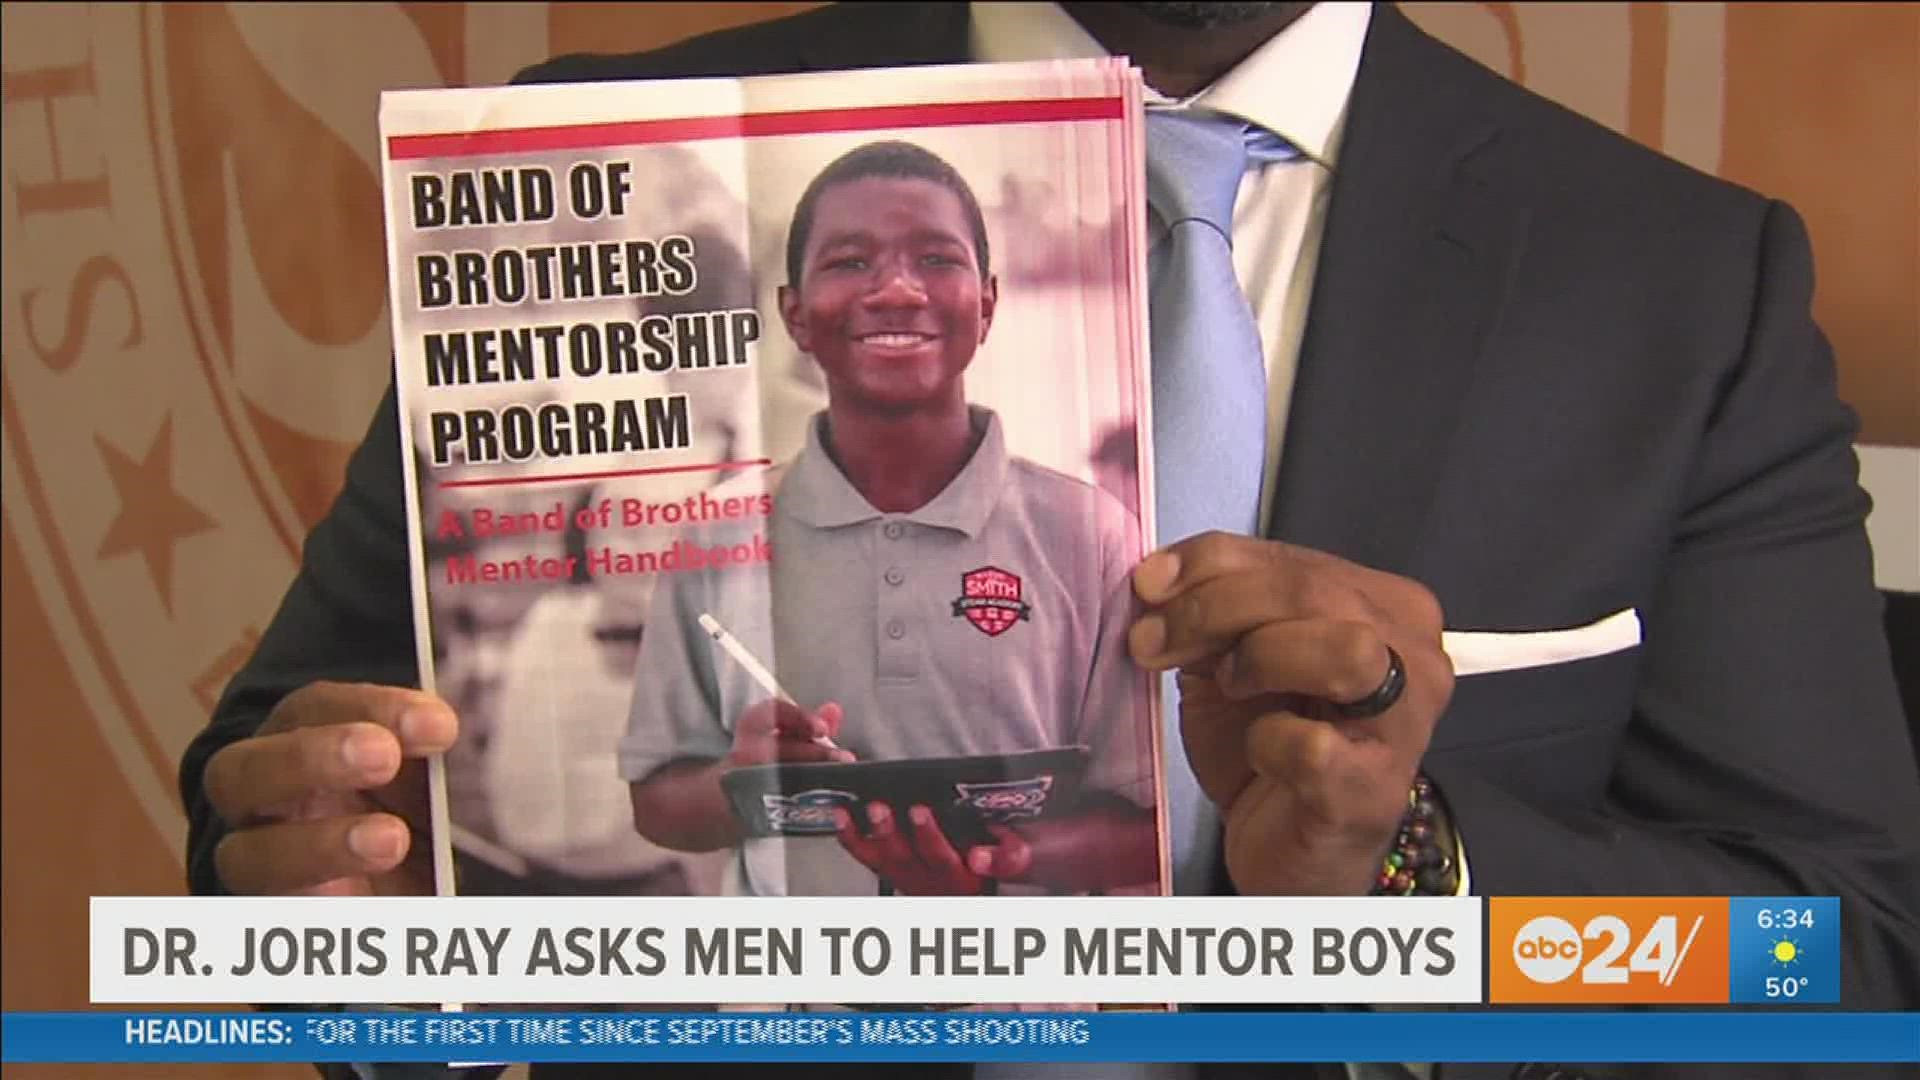 Male role models are needed for the district's Band of Brothers mentorship program